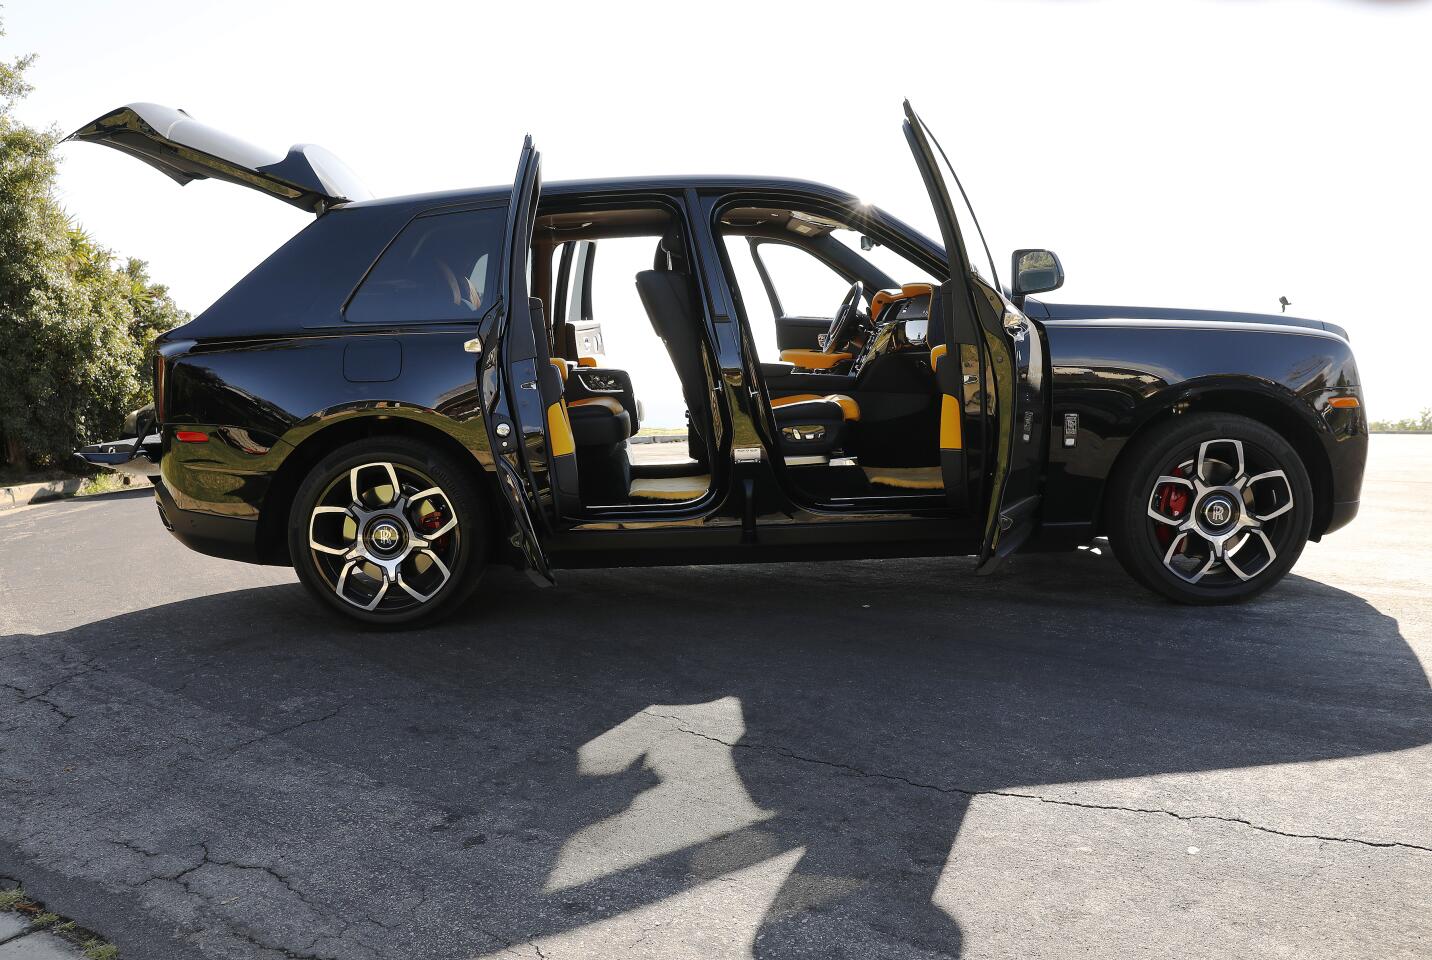 The Rolls-Royce Cullinan Black Badge with its suicide doors and winged hatch open.